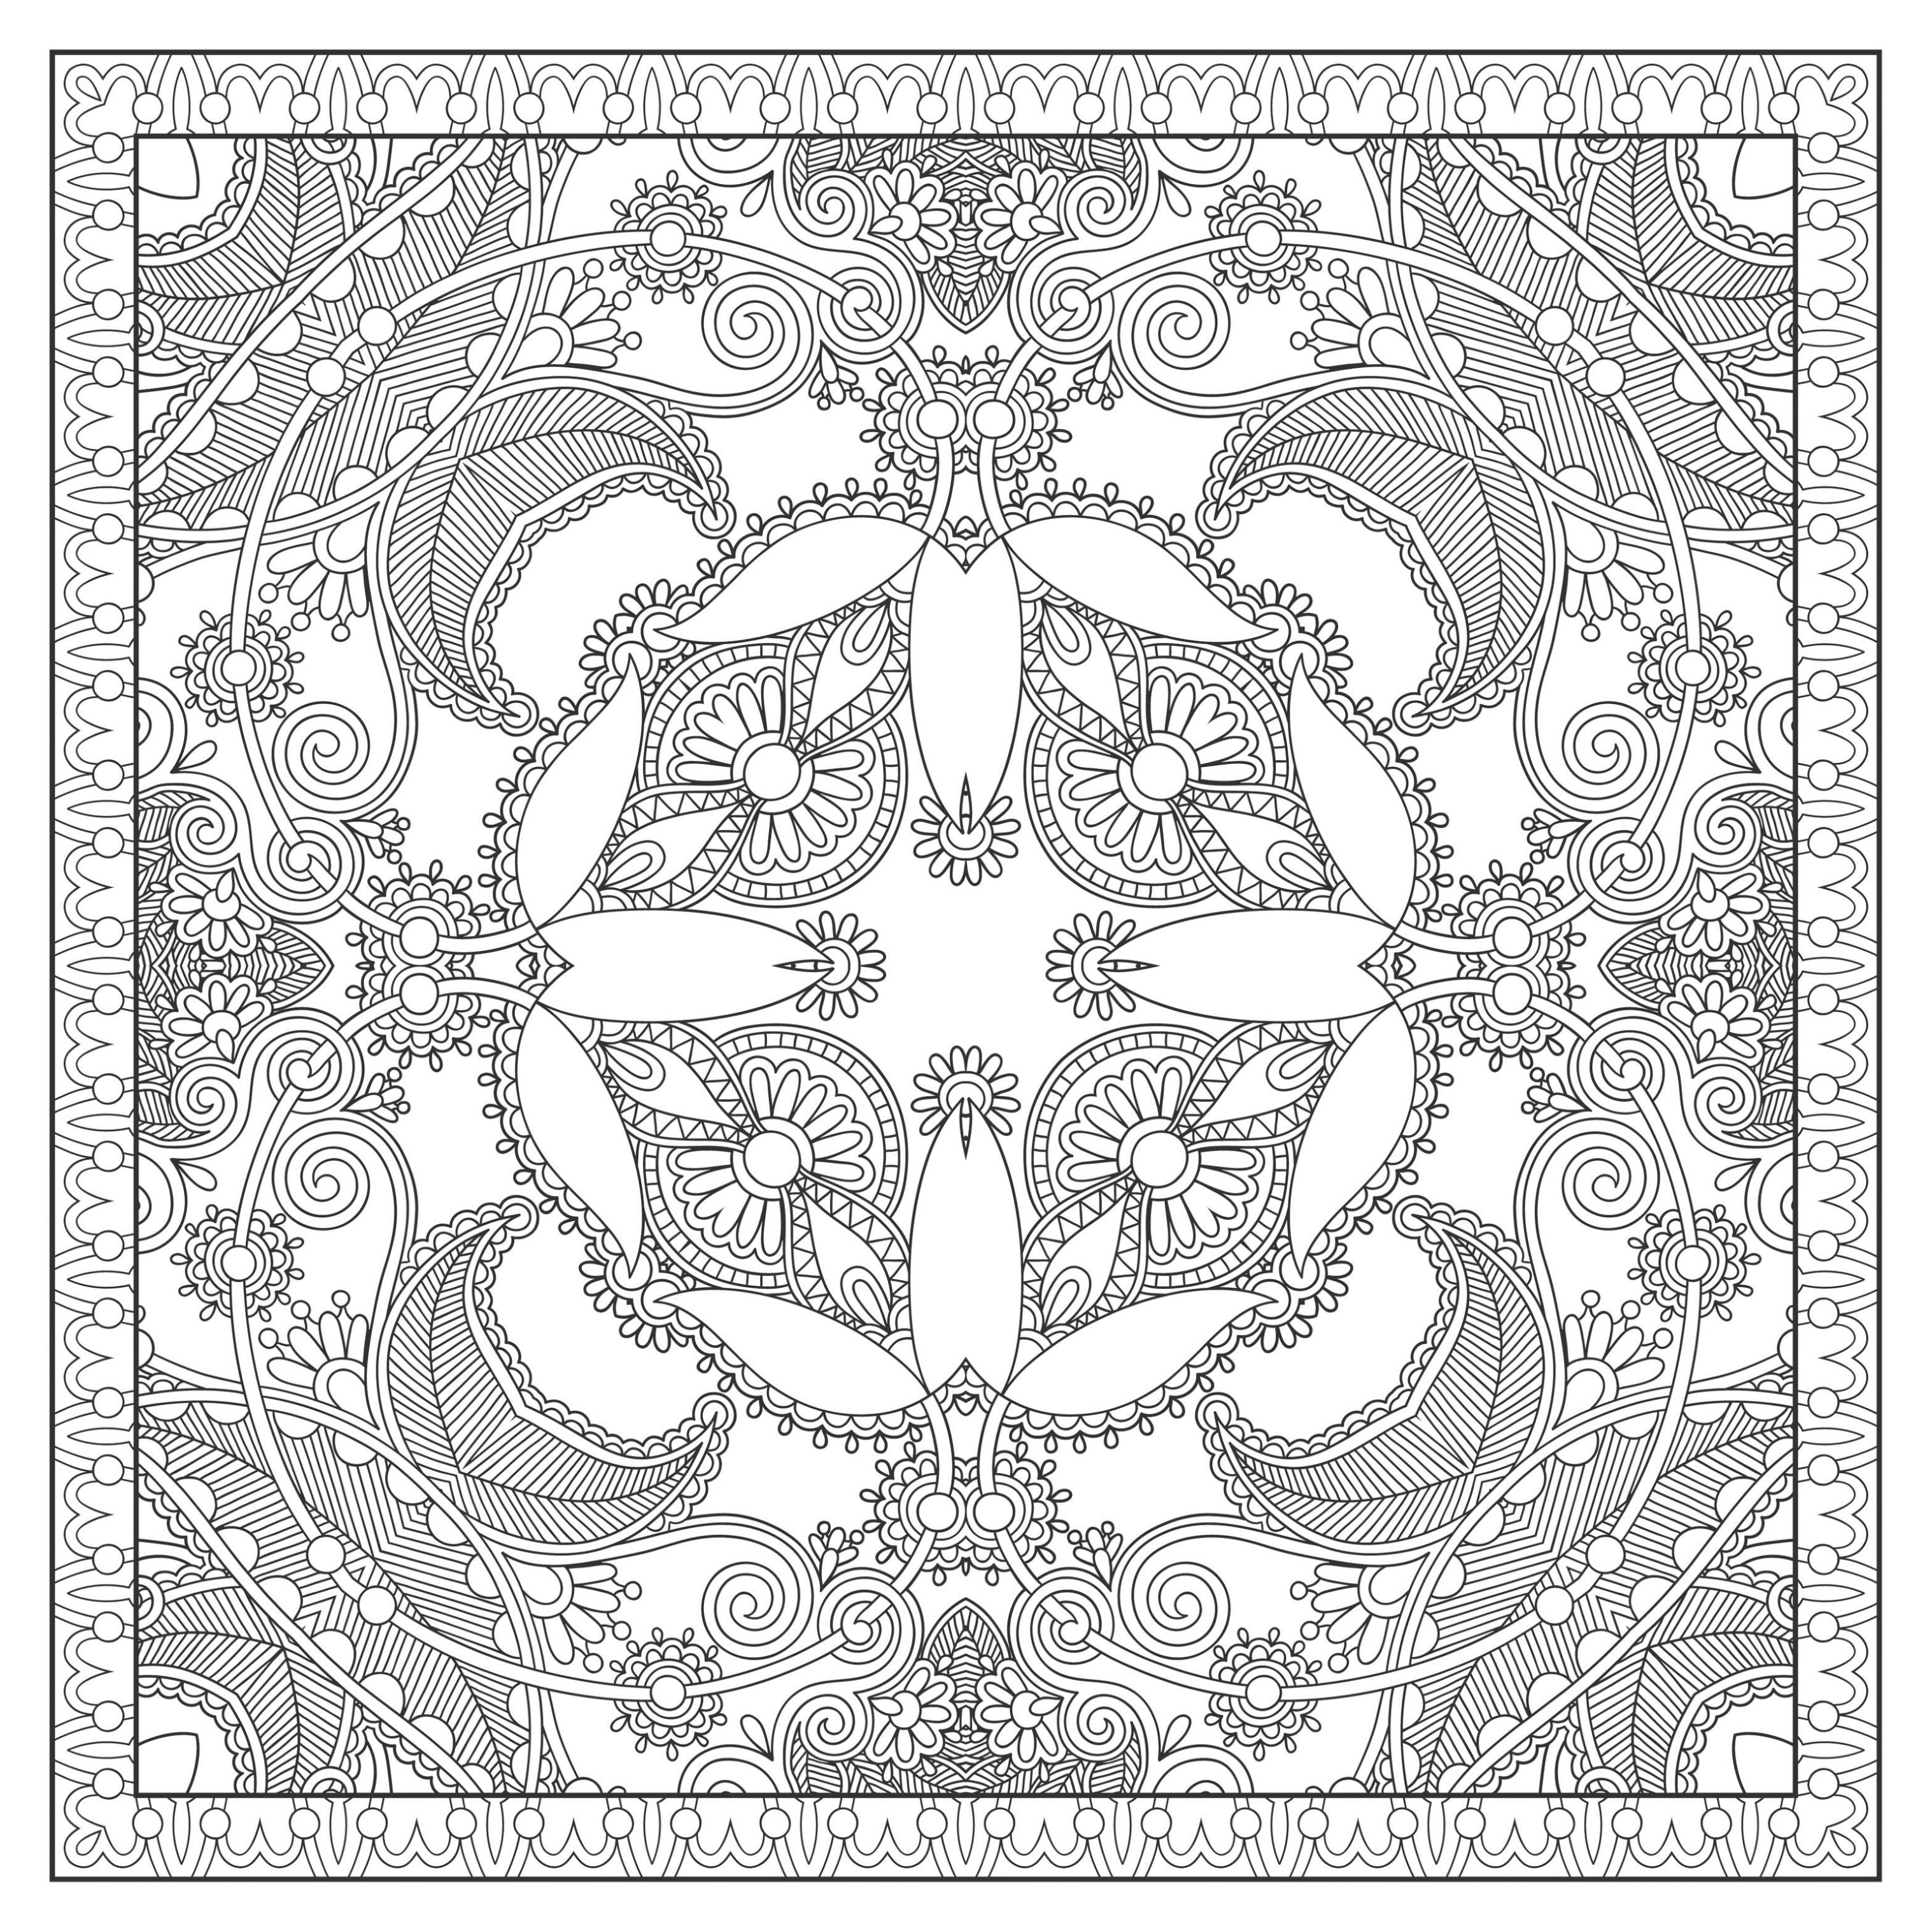 Simple Mandalas coloring page to print and color for free